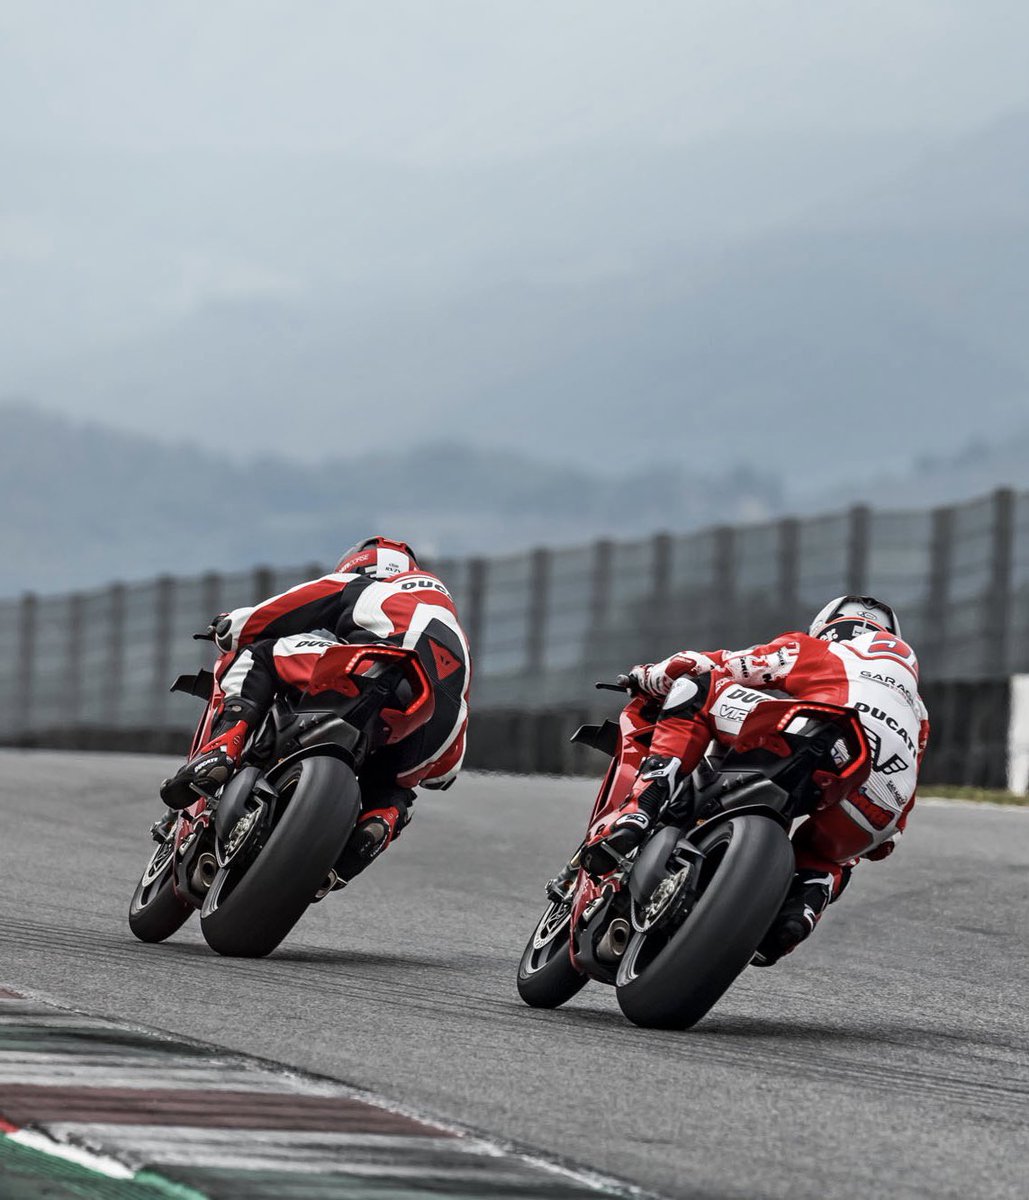 This is your competition’s guaranteed view when you ride the Panigale V4 R.

#Ducati #PanigaleV4R #DucatiPanigaleV4R #Ducati2019 #Ducatisti